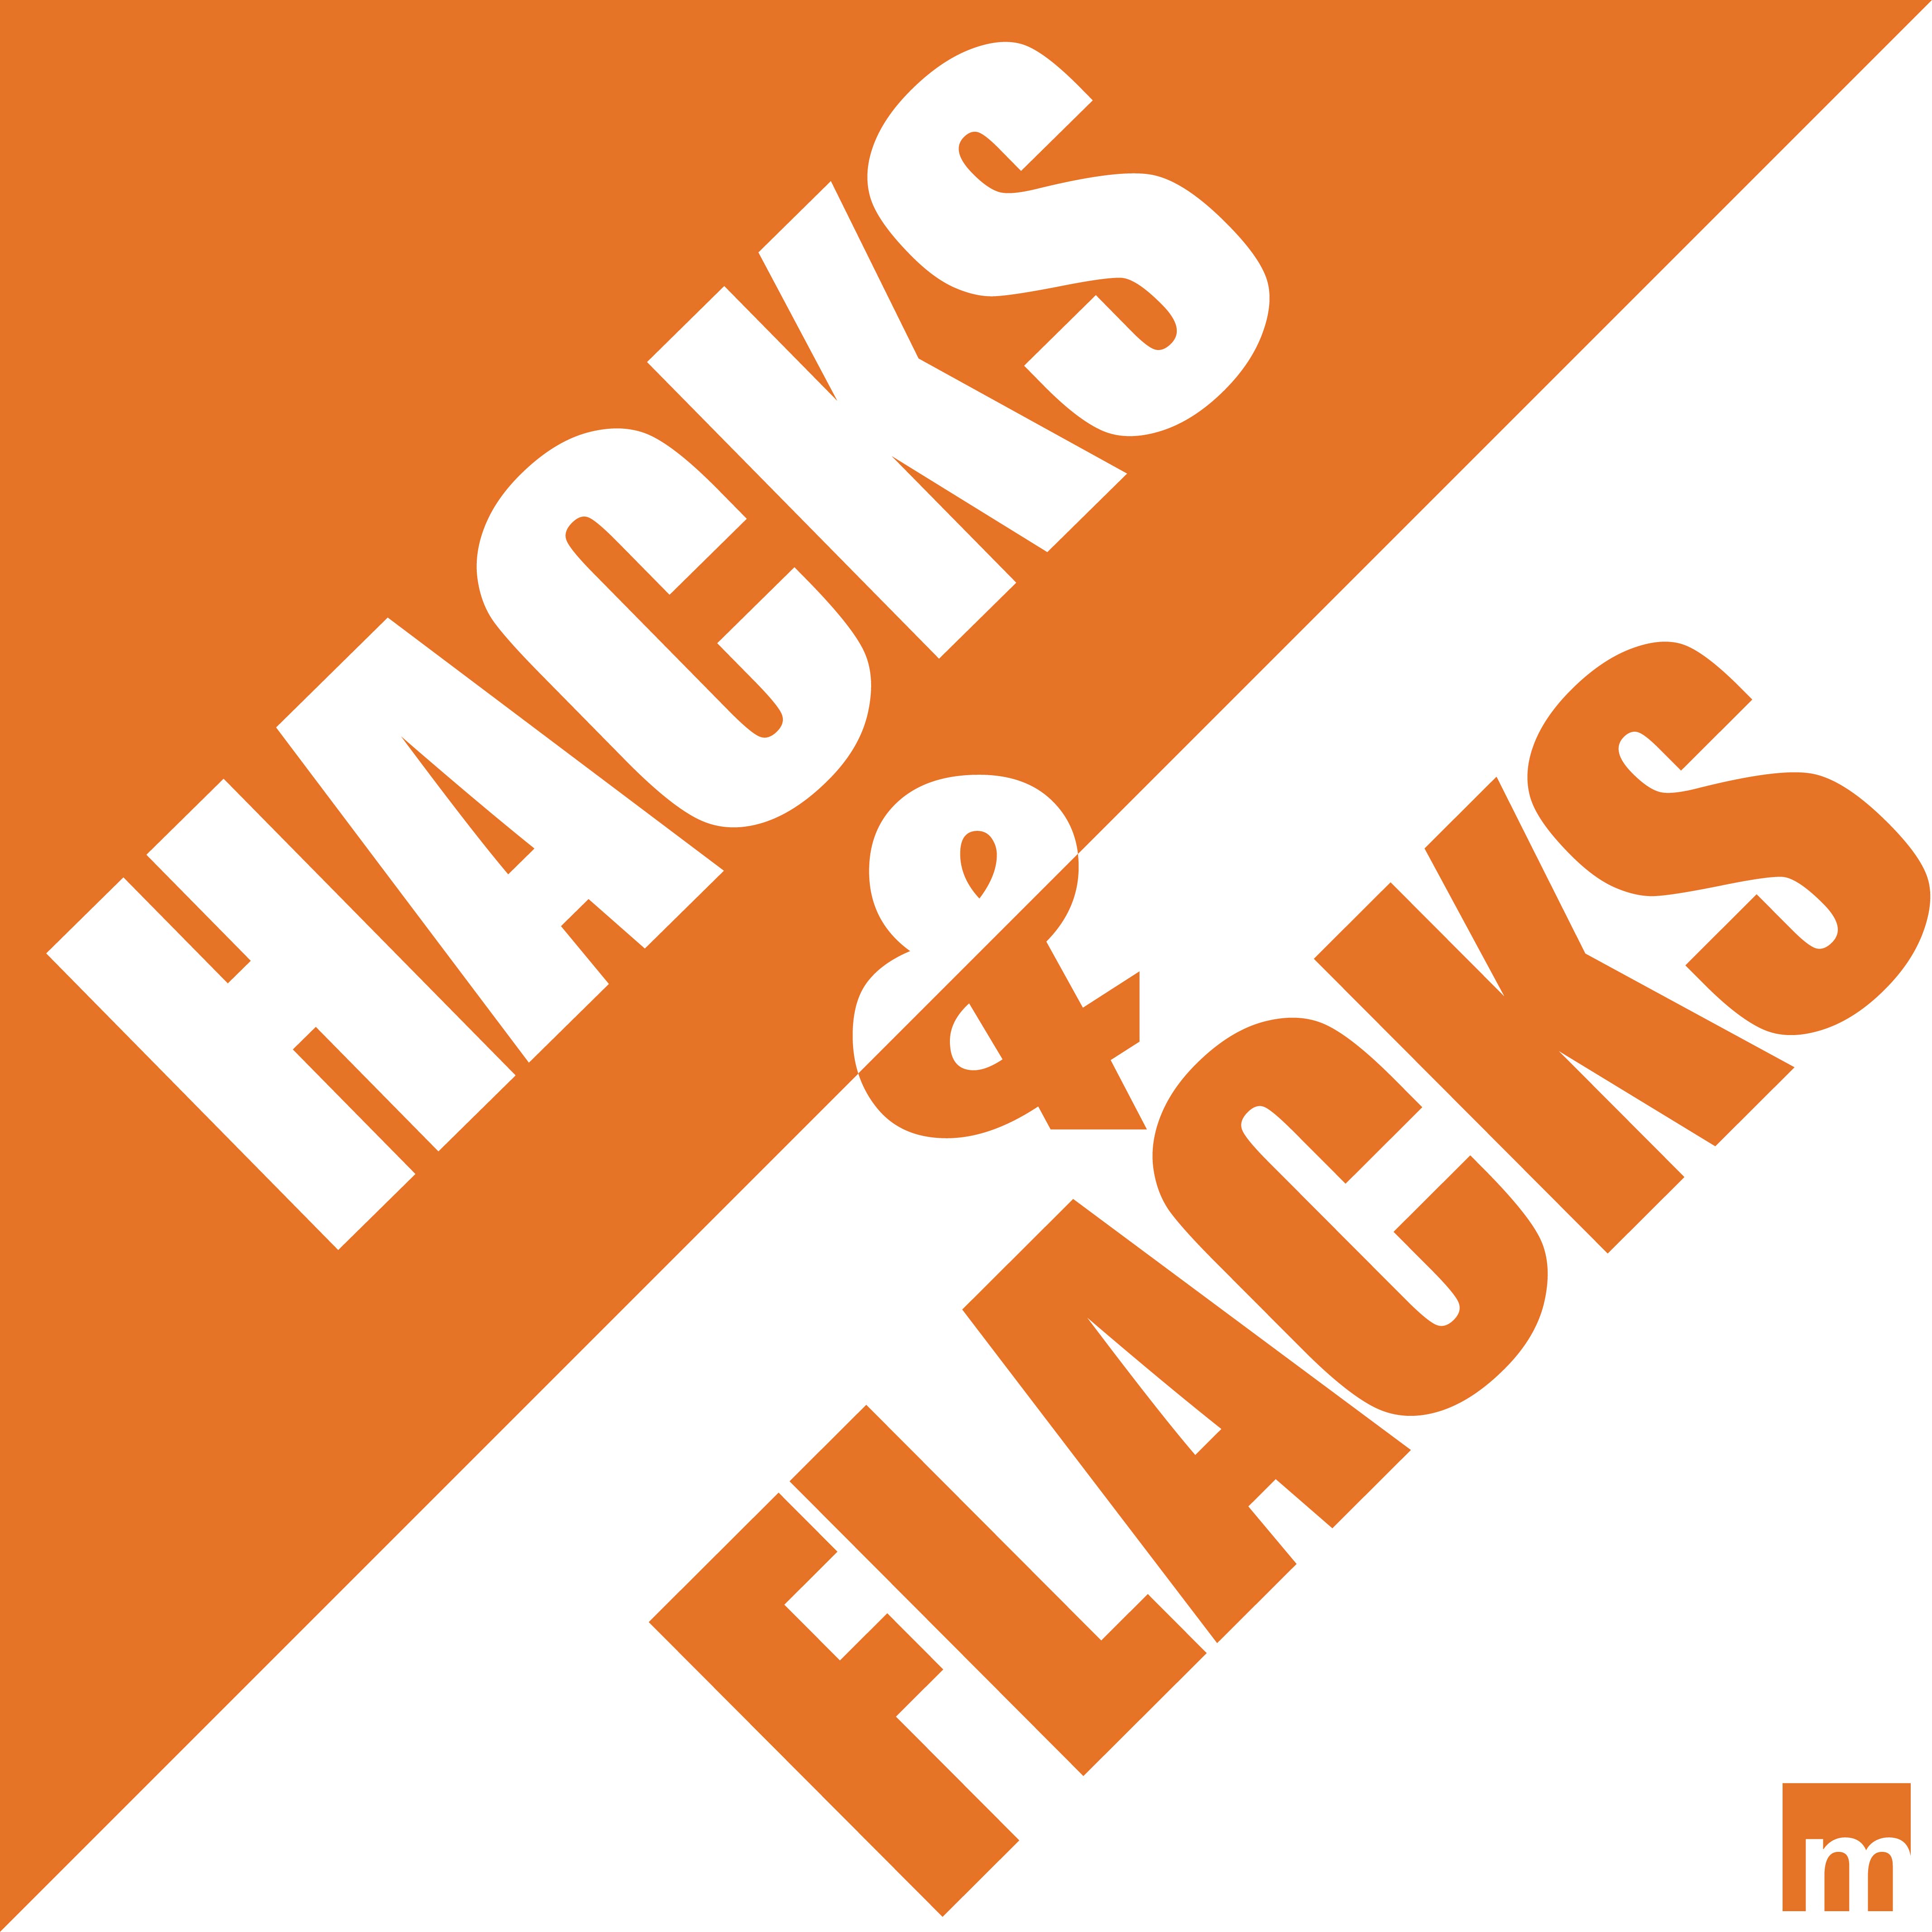 Hacks & Flacks: Doing One Thing Really Well 